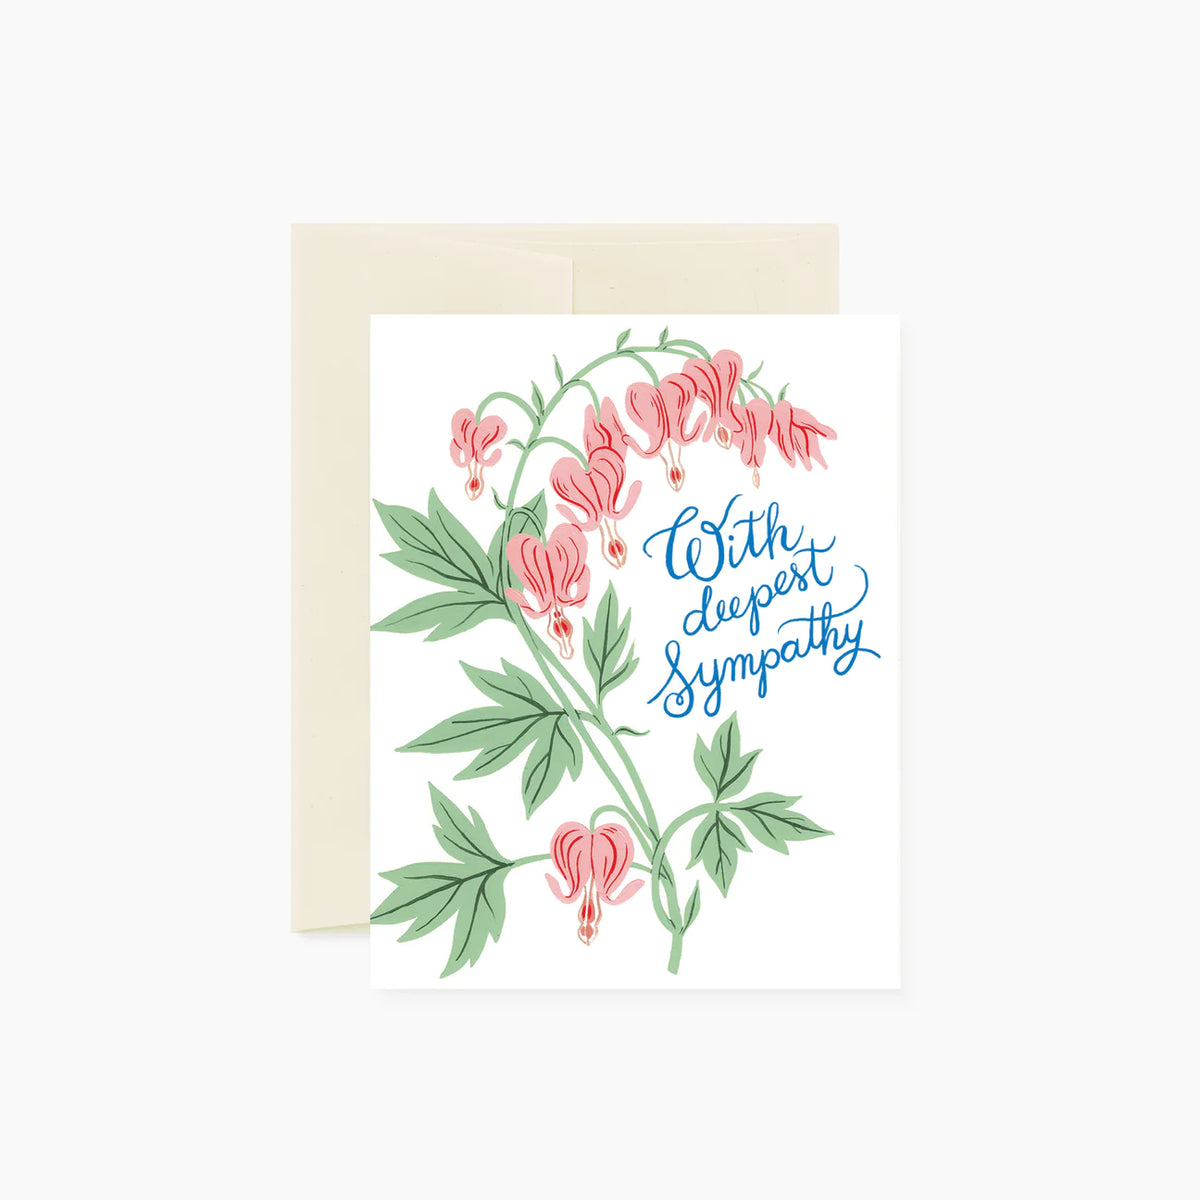 With Deepest sympathy card by Botanica Paper co.